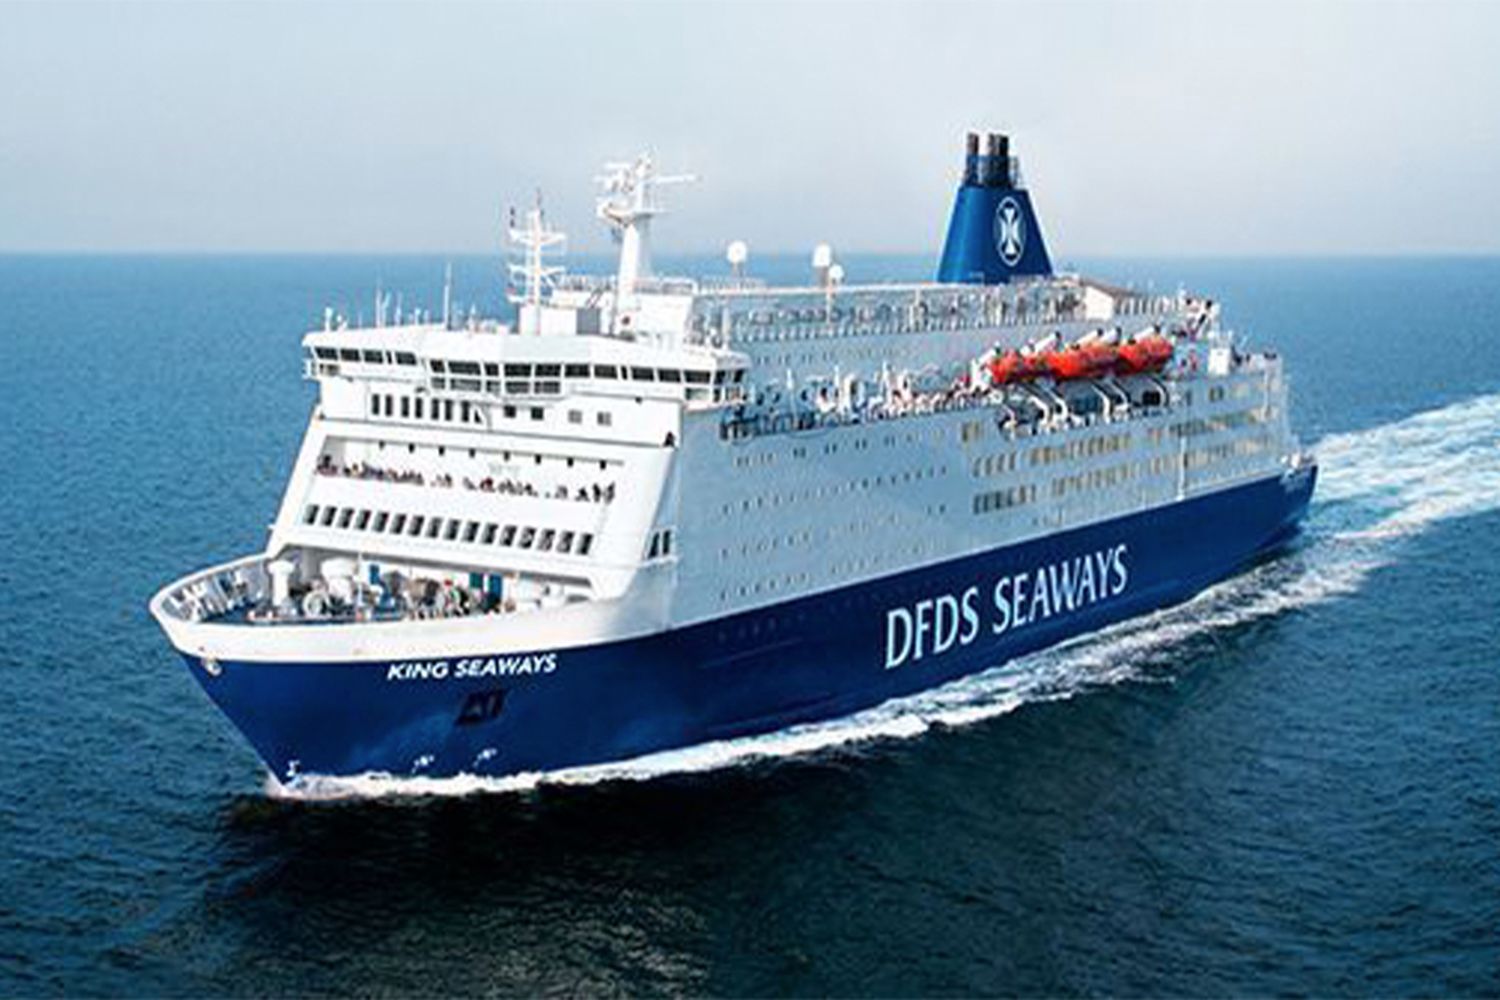 dfds mini cruise offers